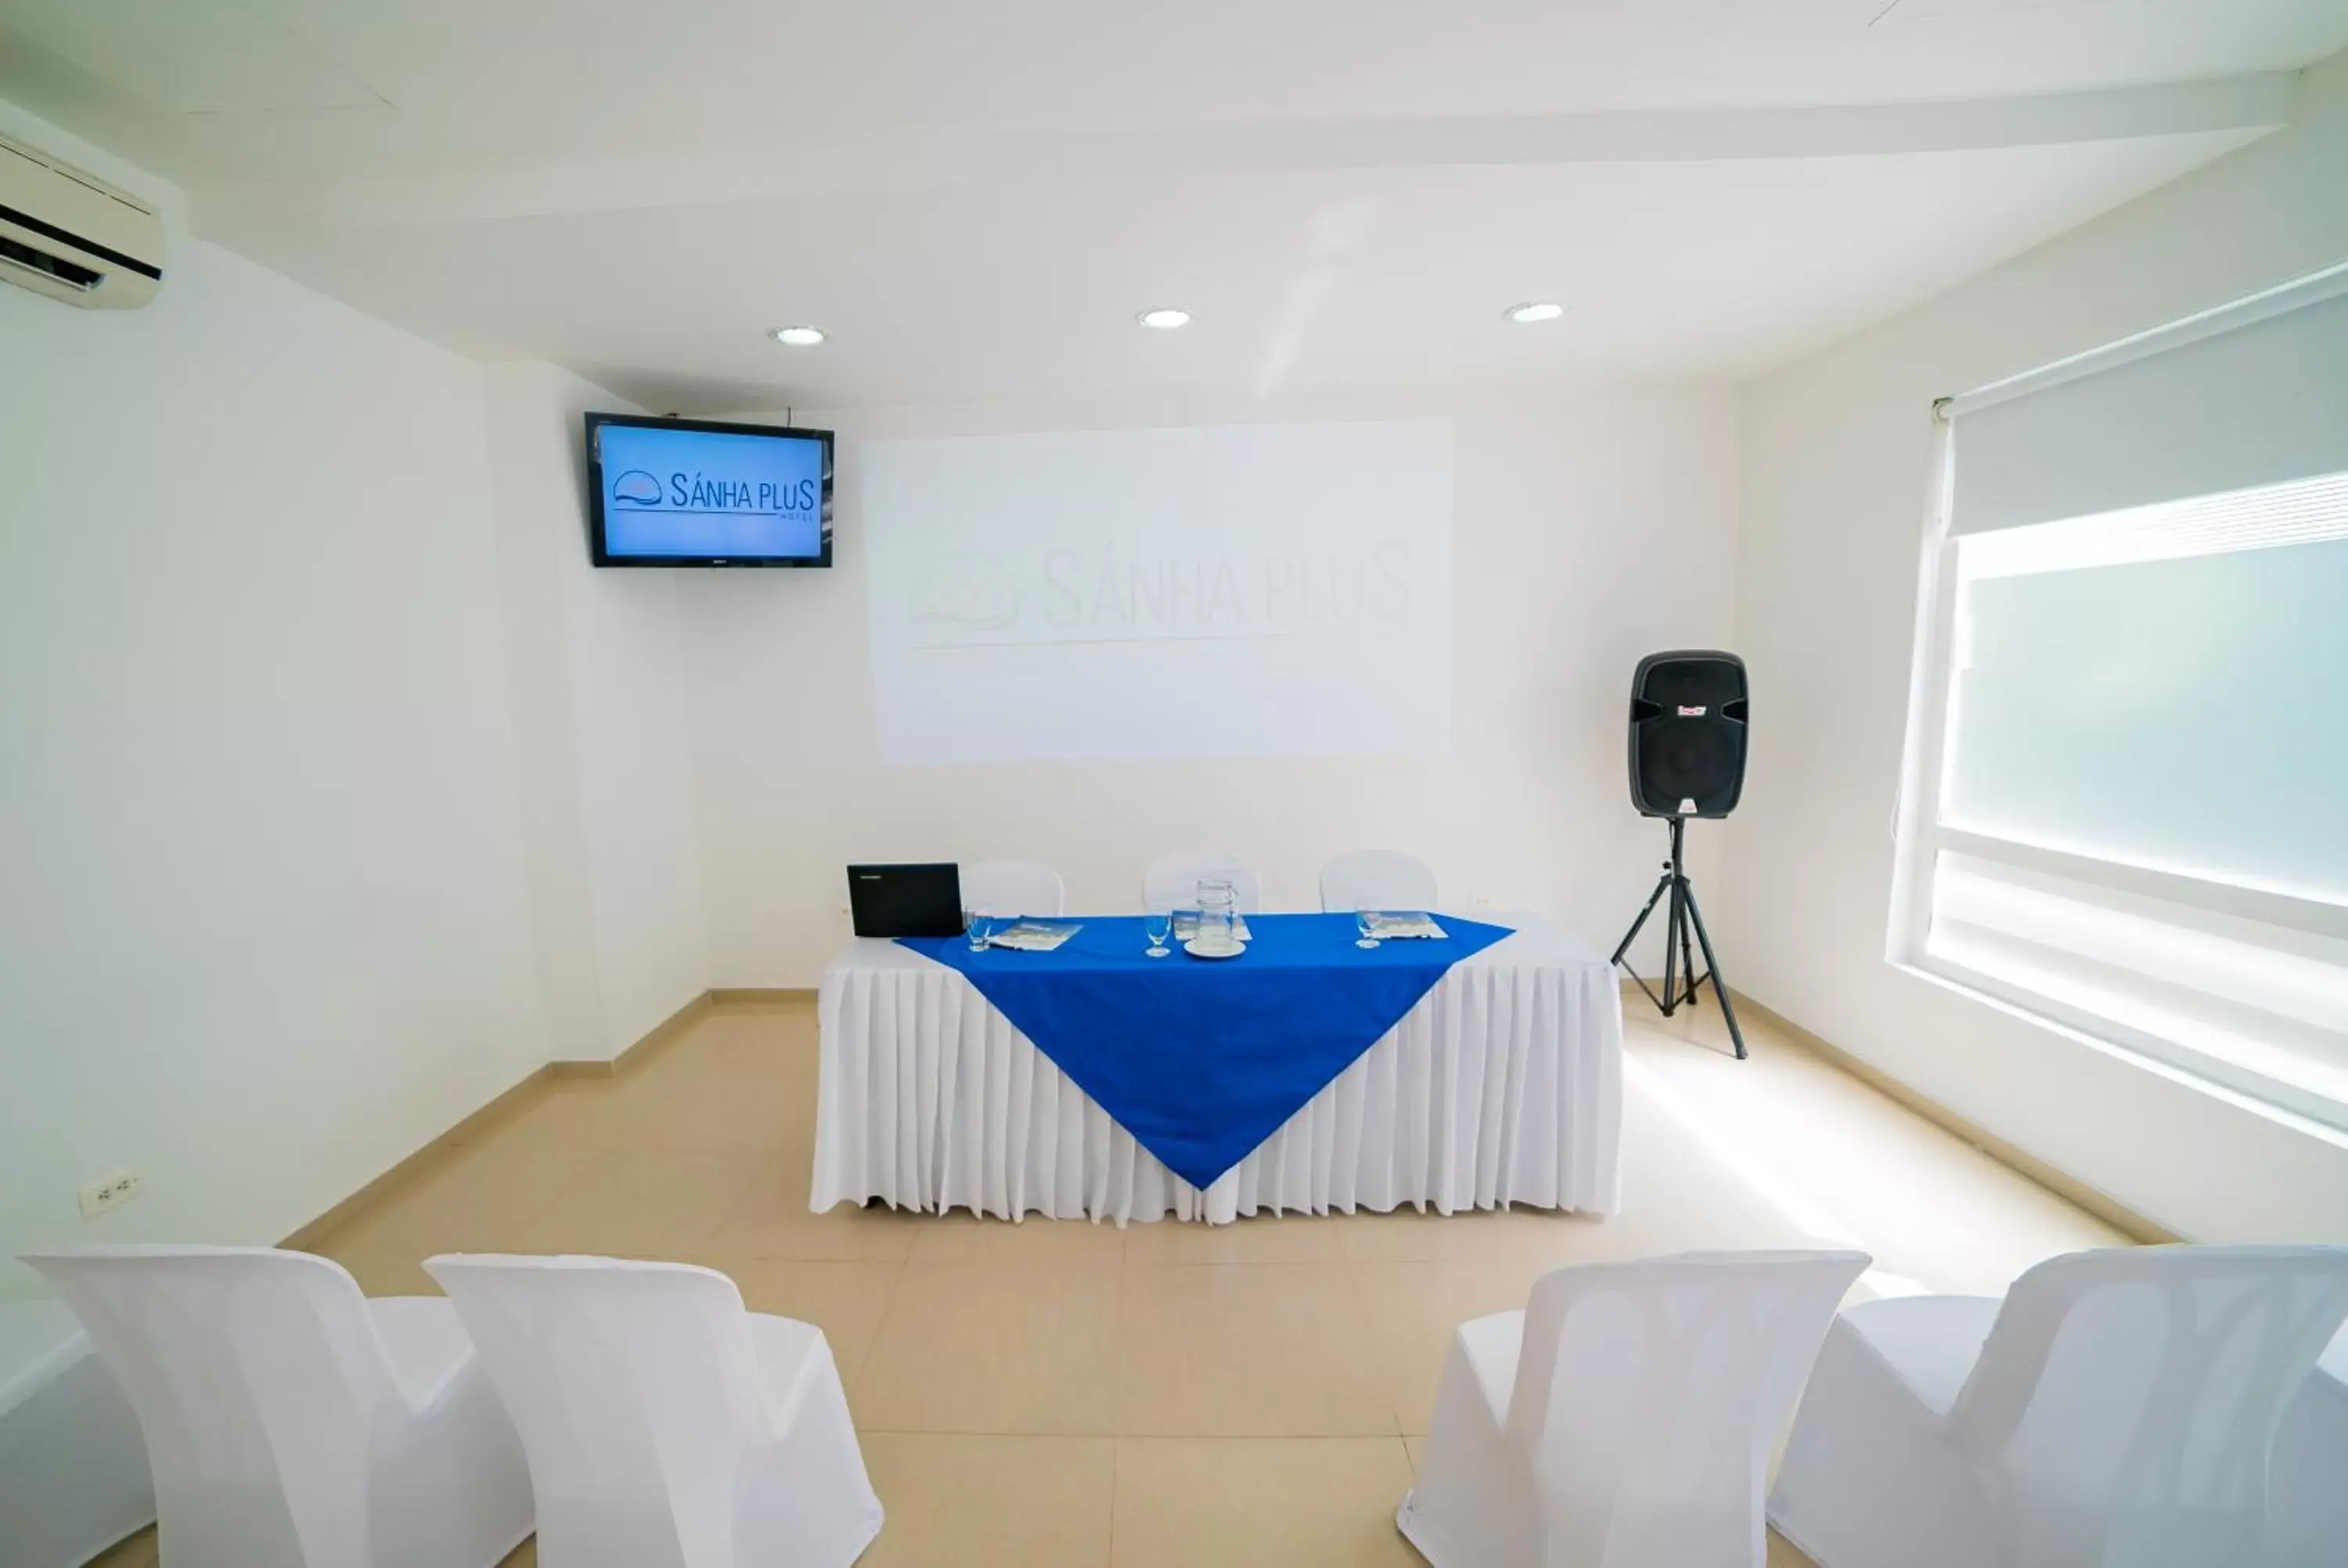 Meeting/conference room, Banquet Facilities in Sanha Plus Hotel